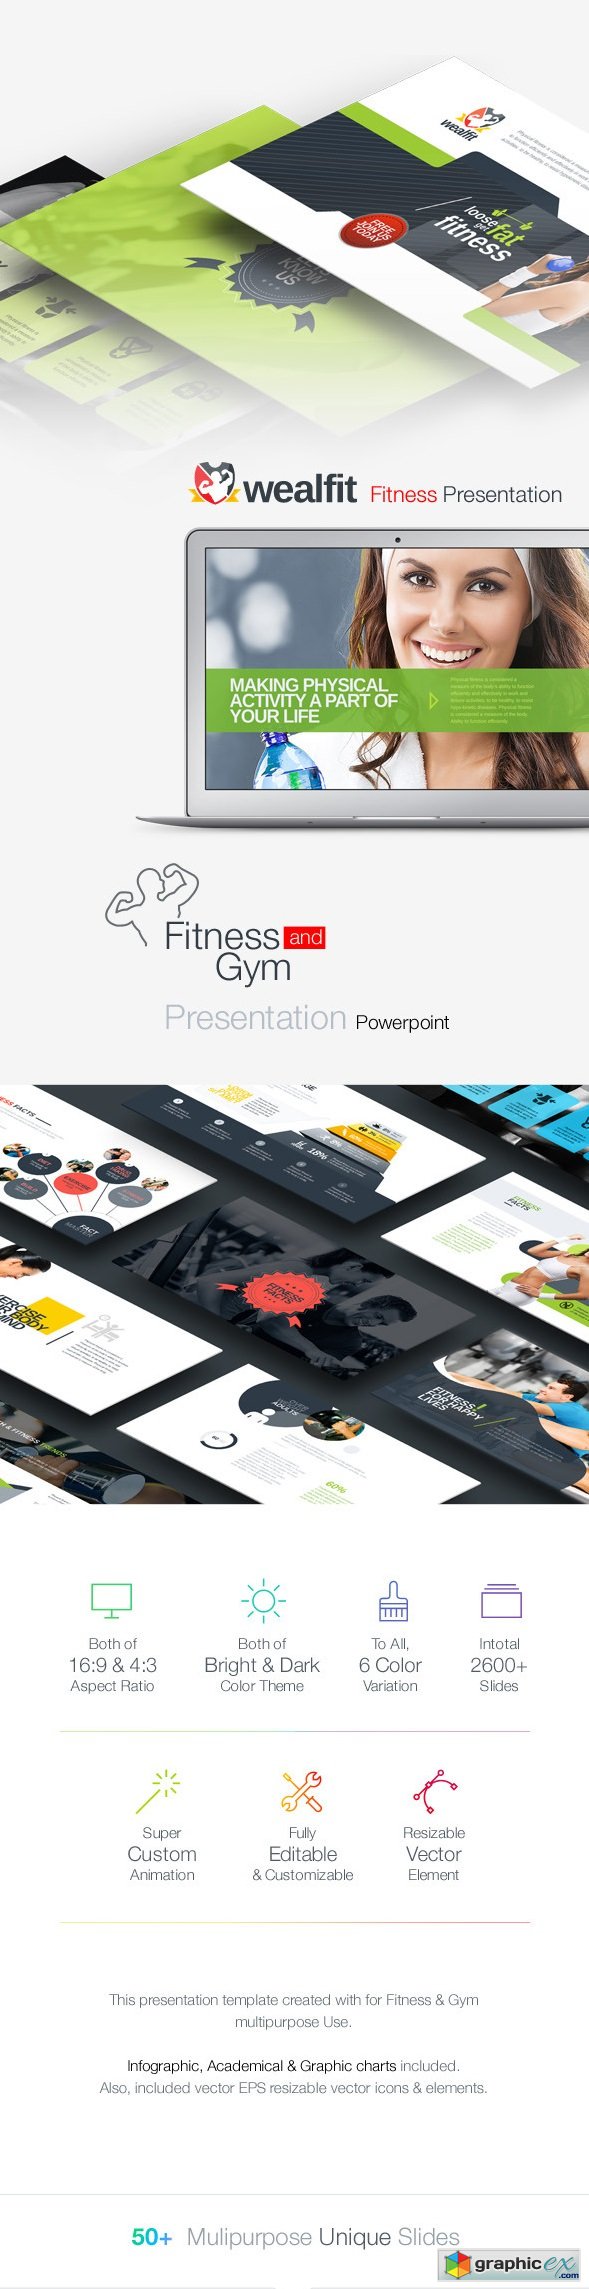 WealthFit Fitness - Gym Powerpoint